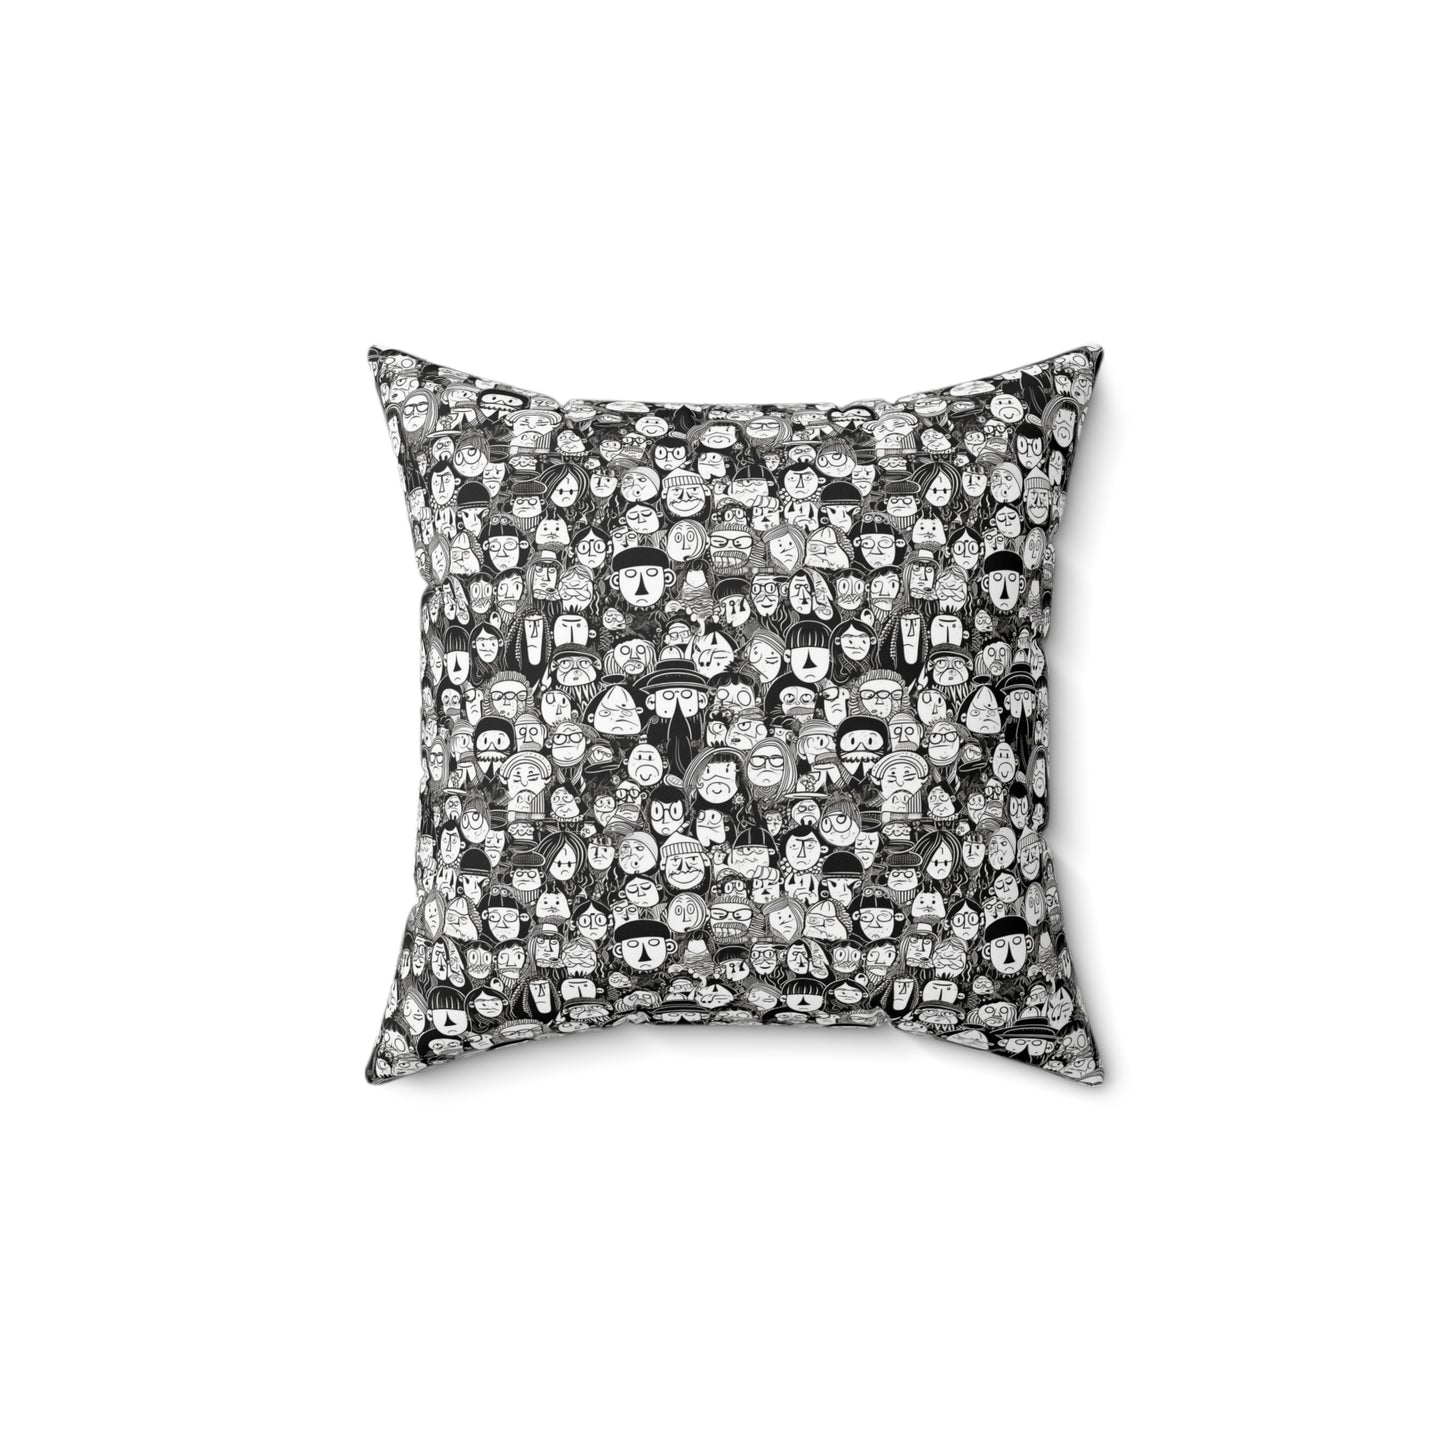 Part of the Crowd Accent Throw Pillow